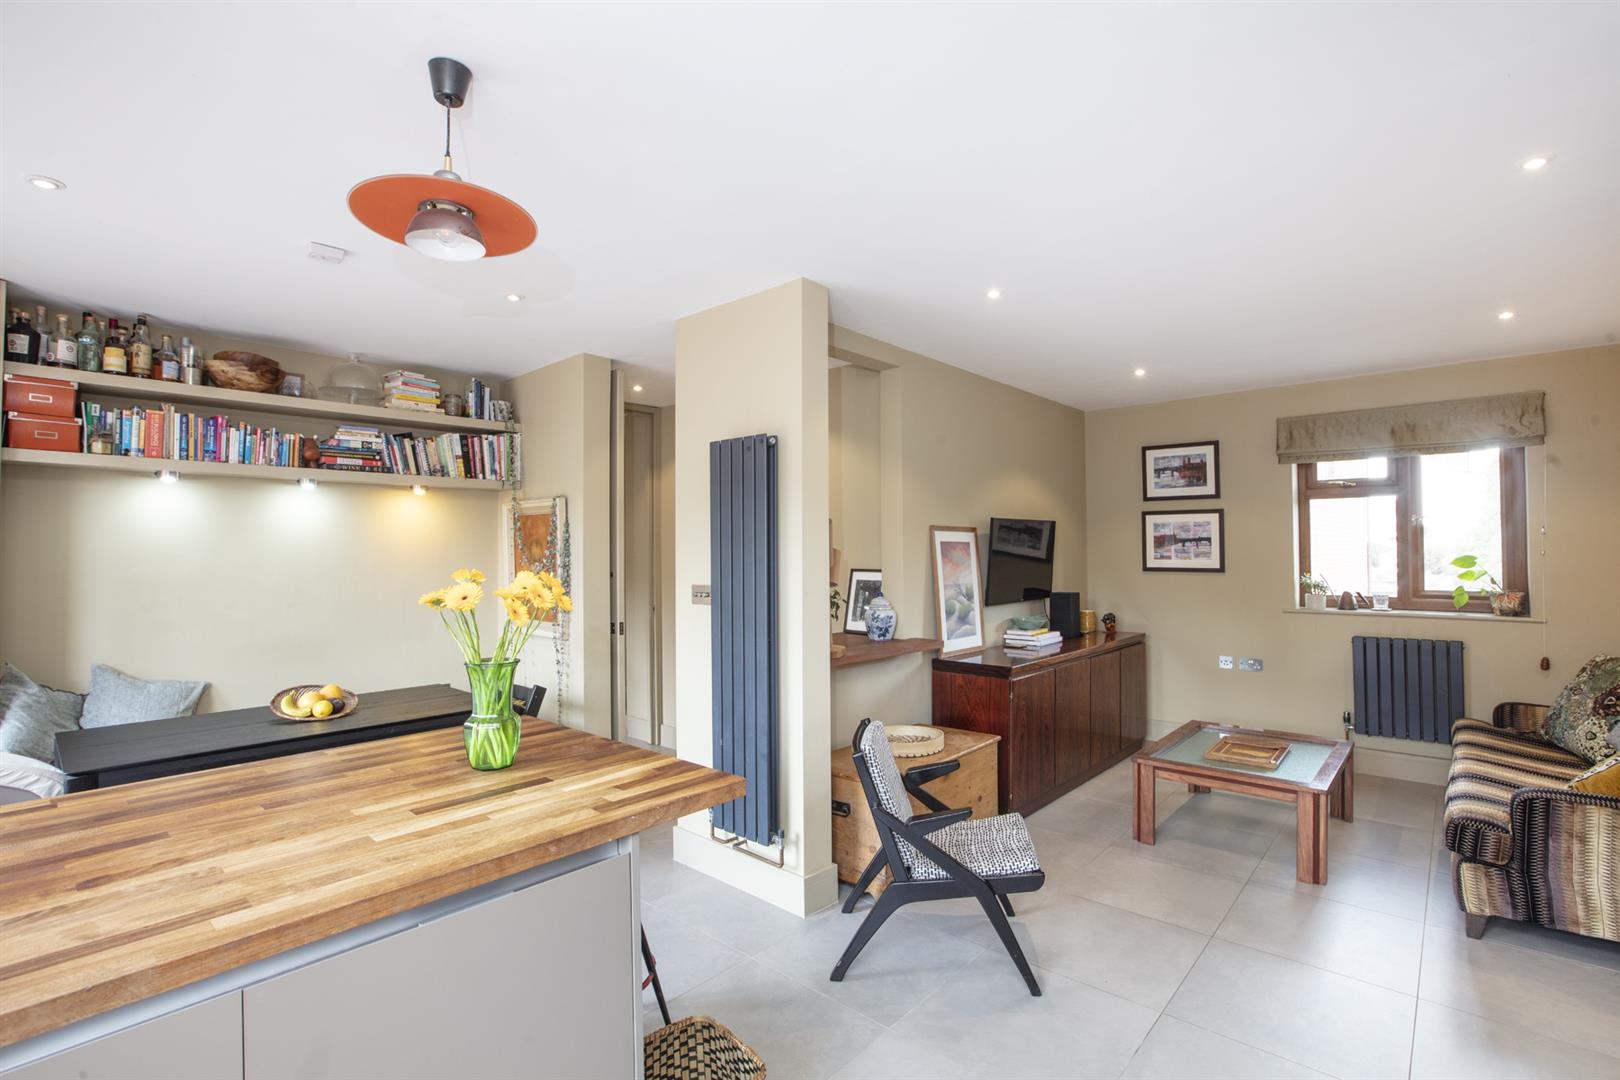 Flat - Purpose Built Sold in Gibbon Road, Nunhead, SE15 996 view8